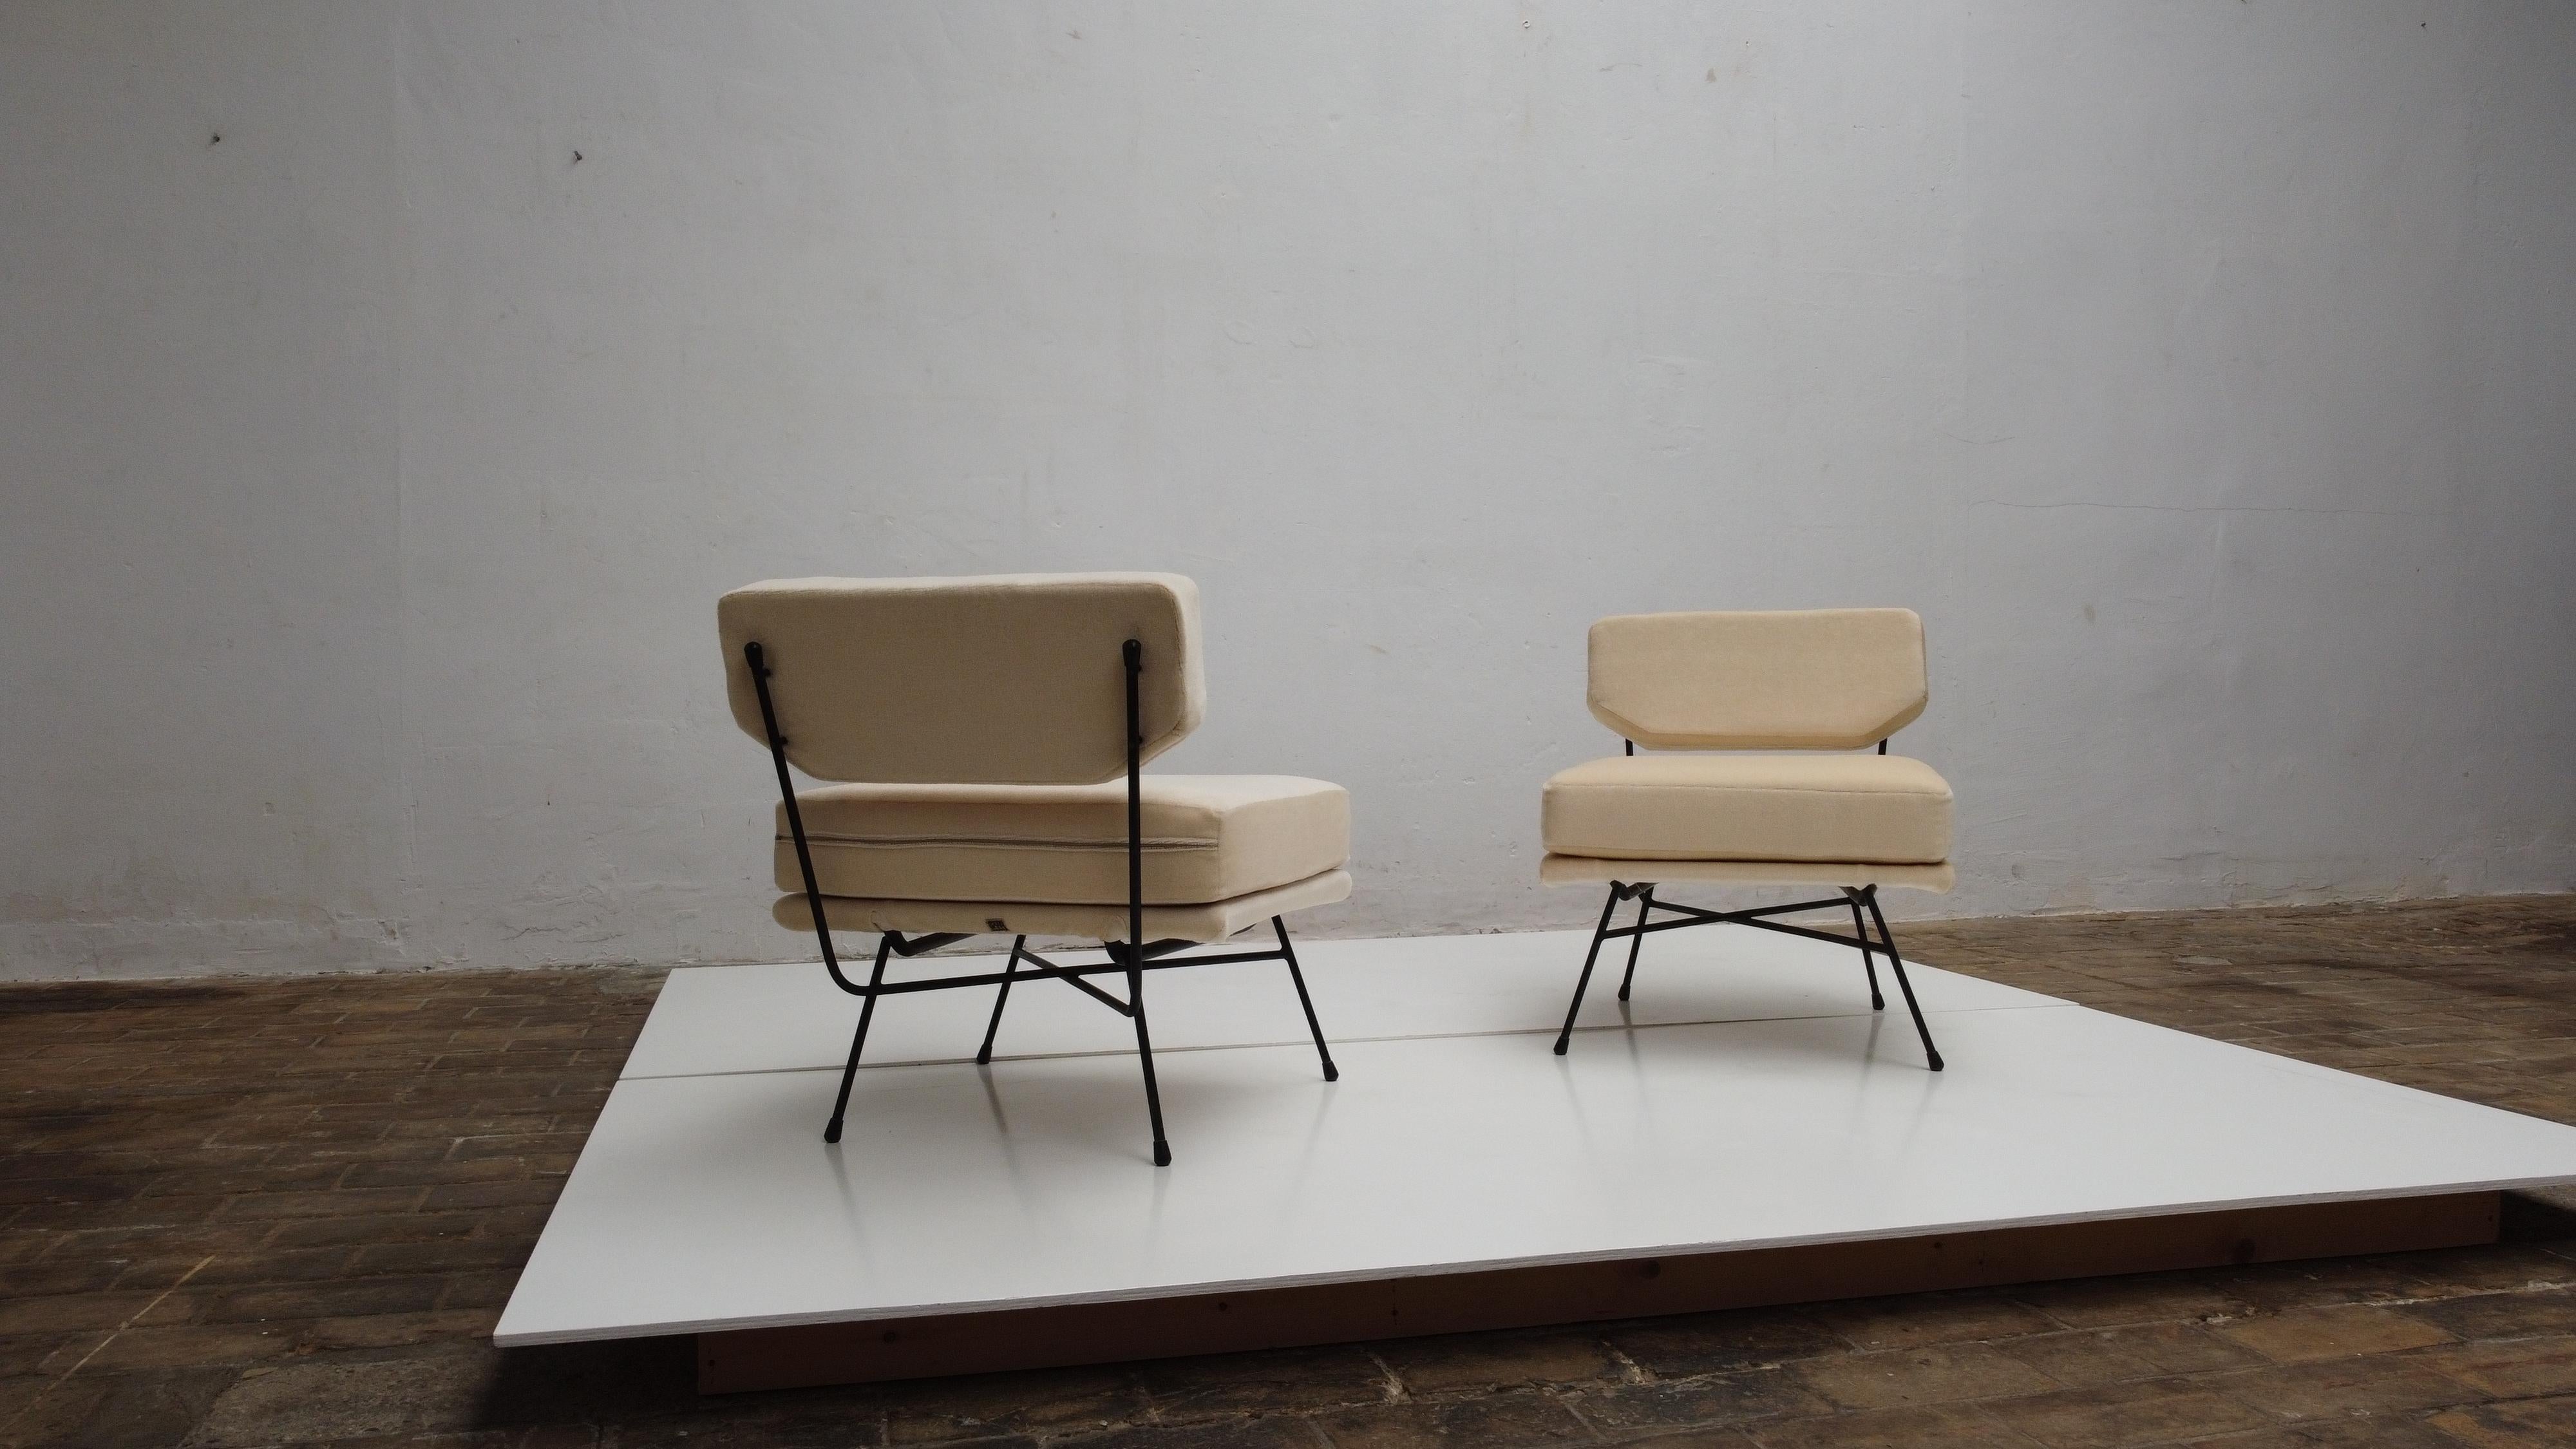 Mid-20th Century Pair of 'Elettra' Lounge Chairs by BBPR, Arflex, Italy 1953, Compasso D'Oro 1954 For Sale